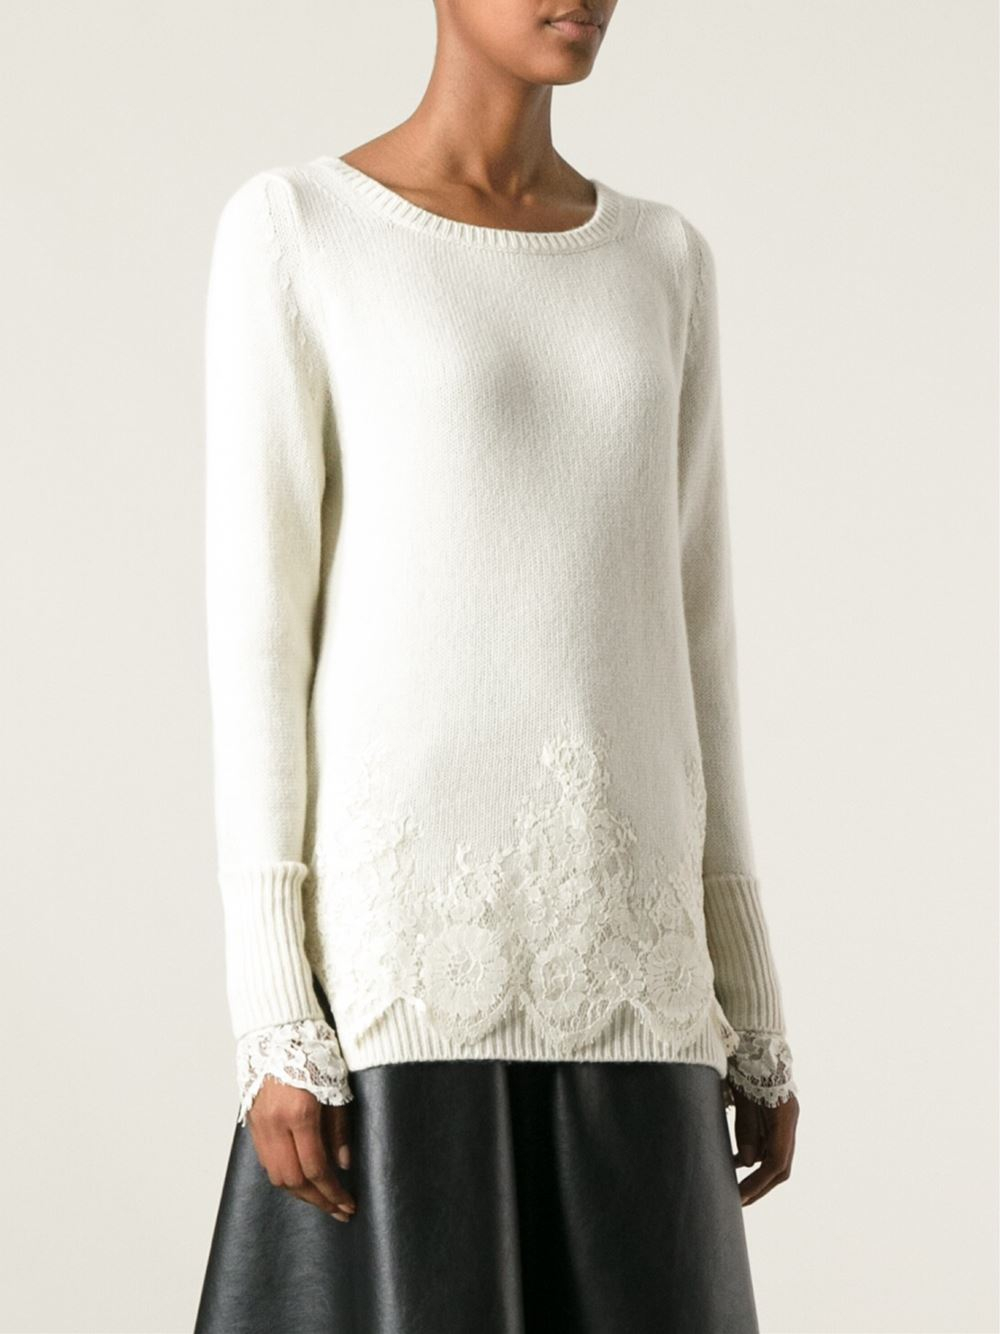 Lyst - Ermanno scervino Lace Detail Sweater in White